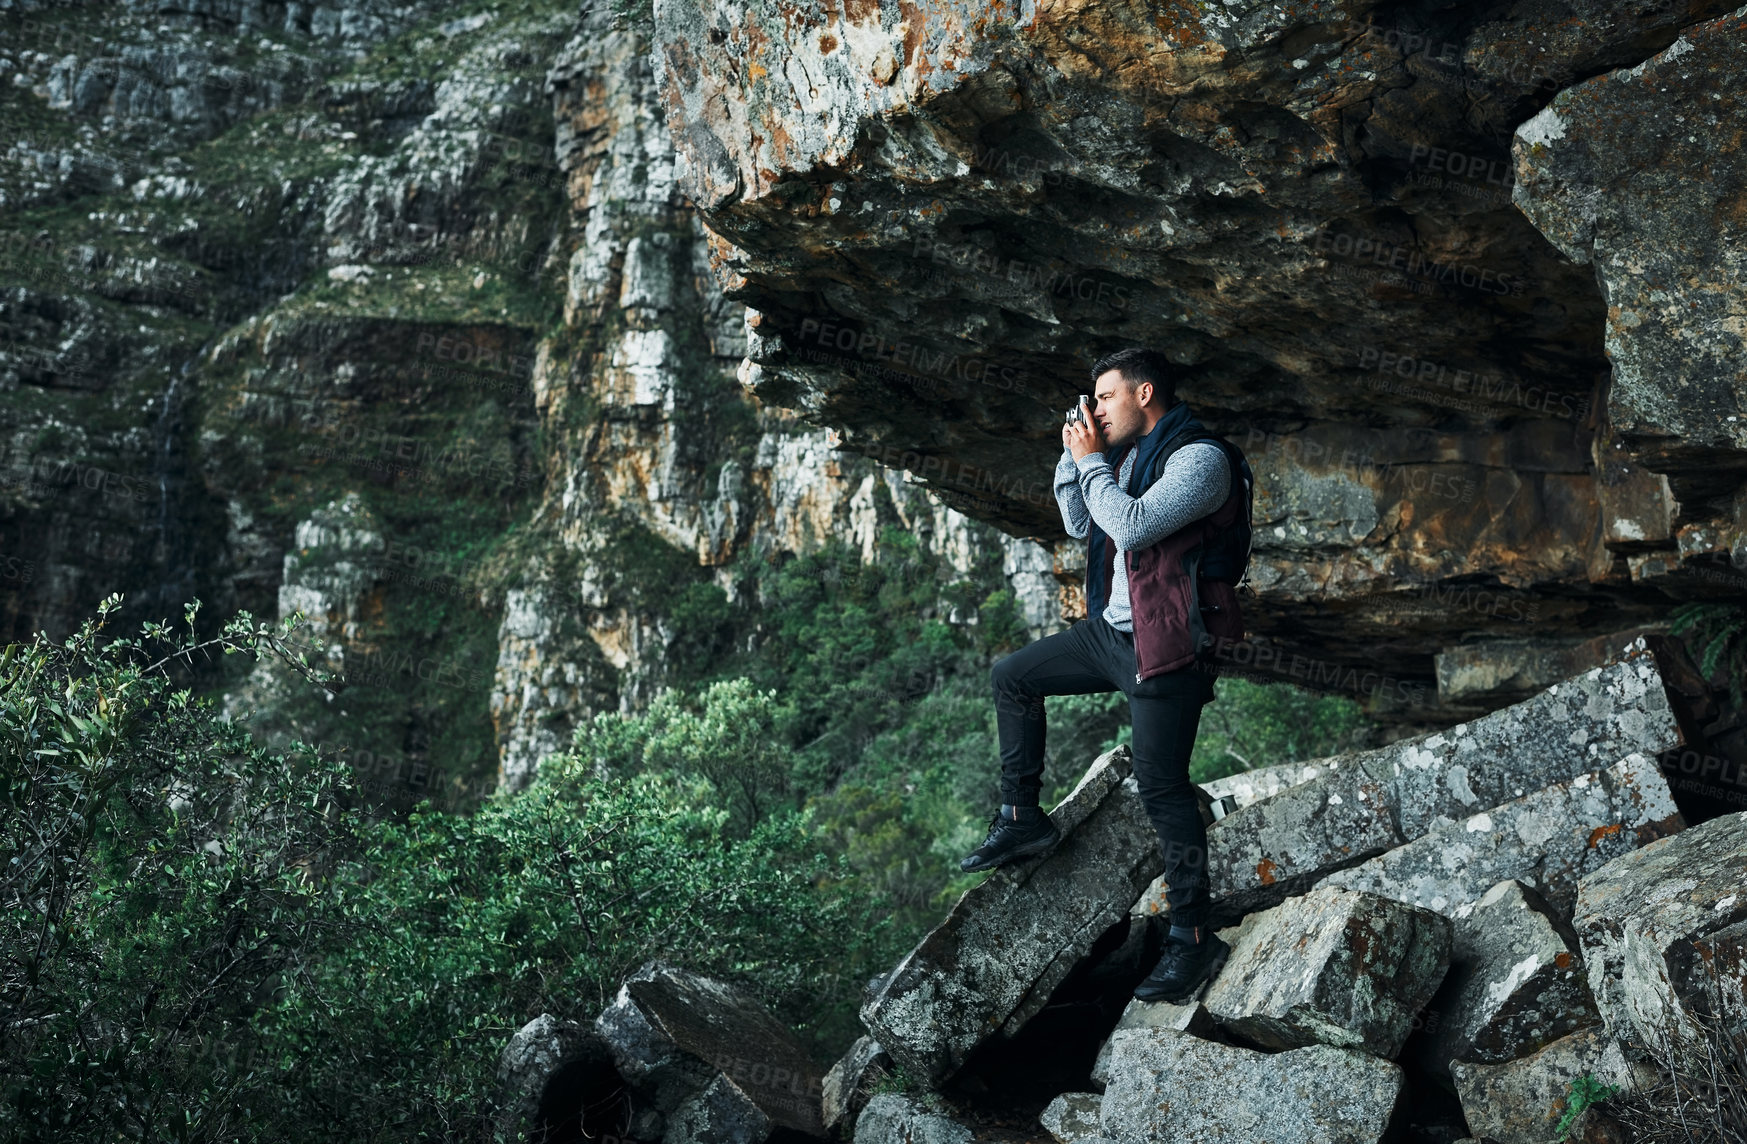 Buy stock photo Shot of a young man taking photos while out on a hike